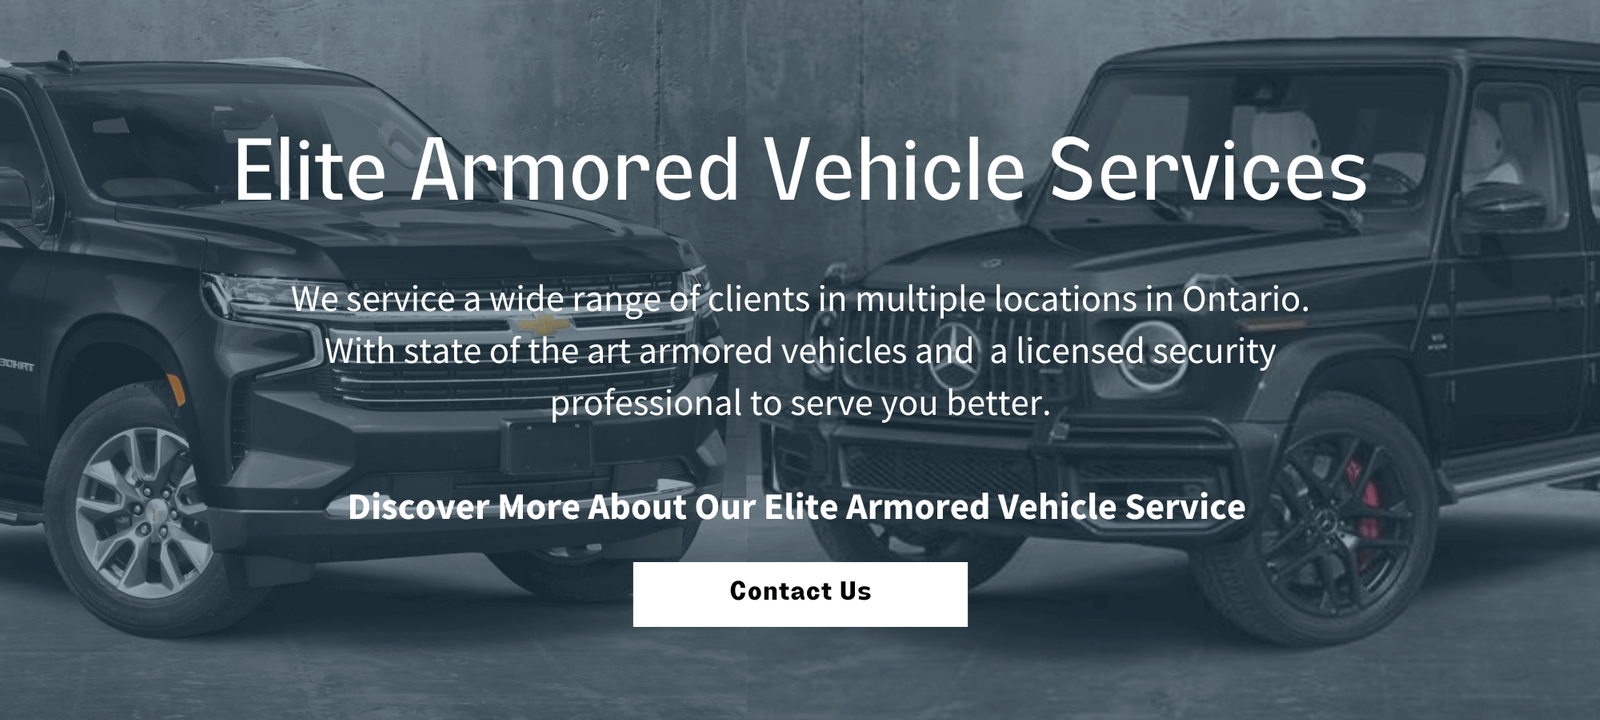 Elite Armored Vehicle Services